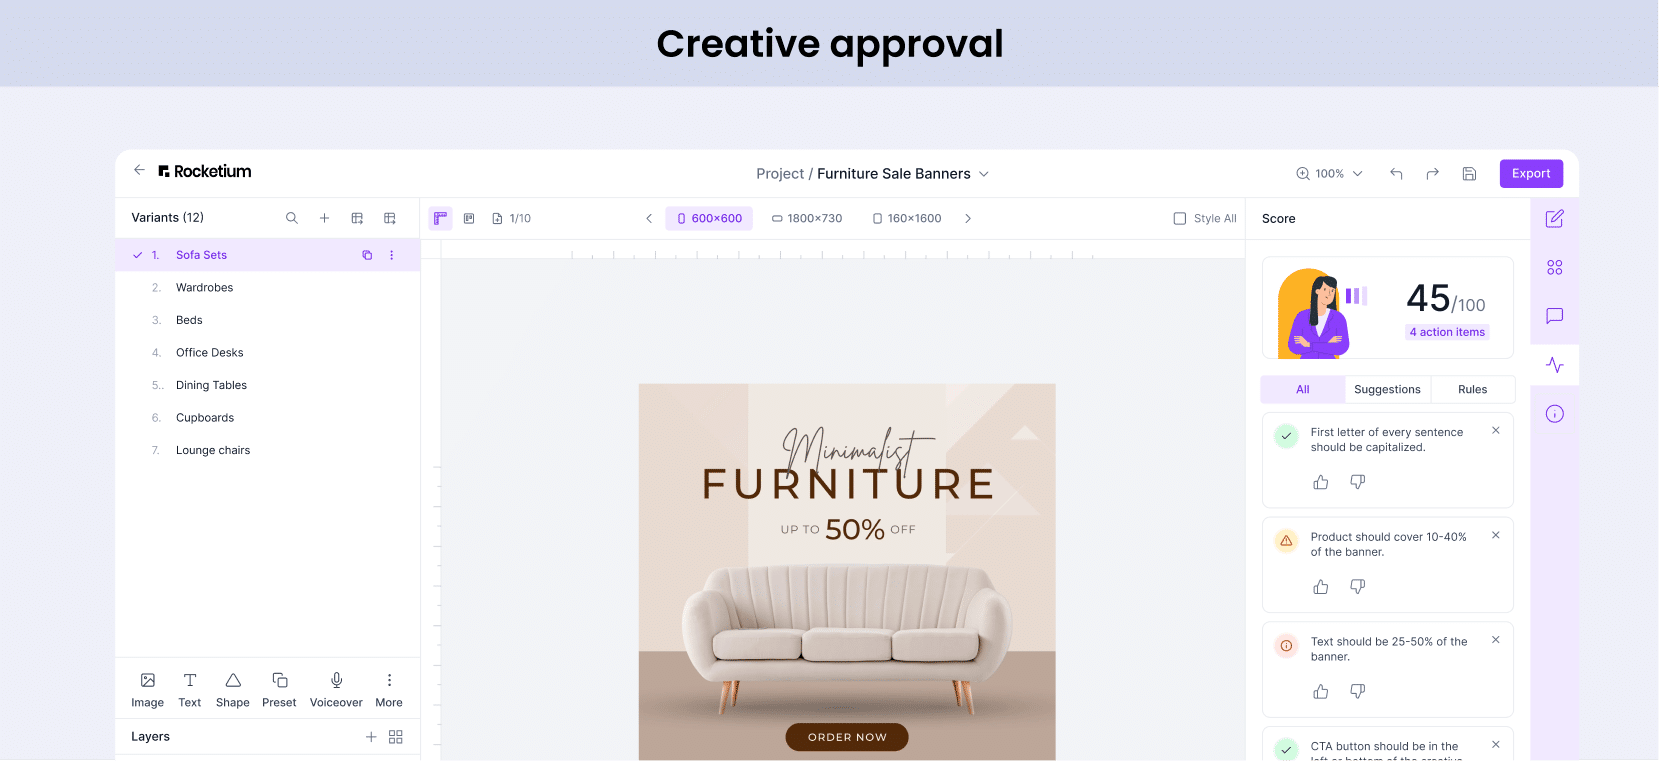 Creative approval